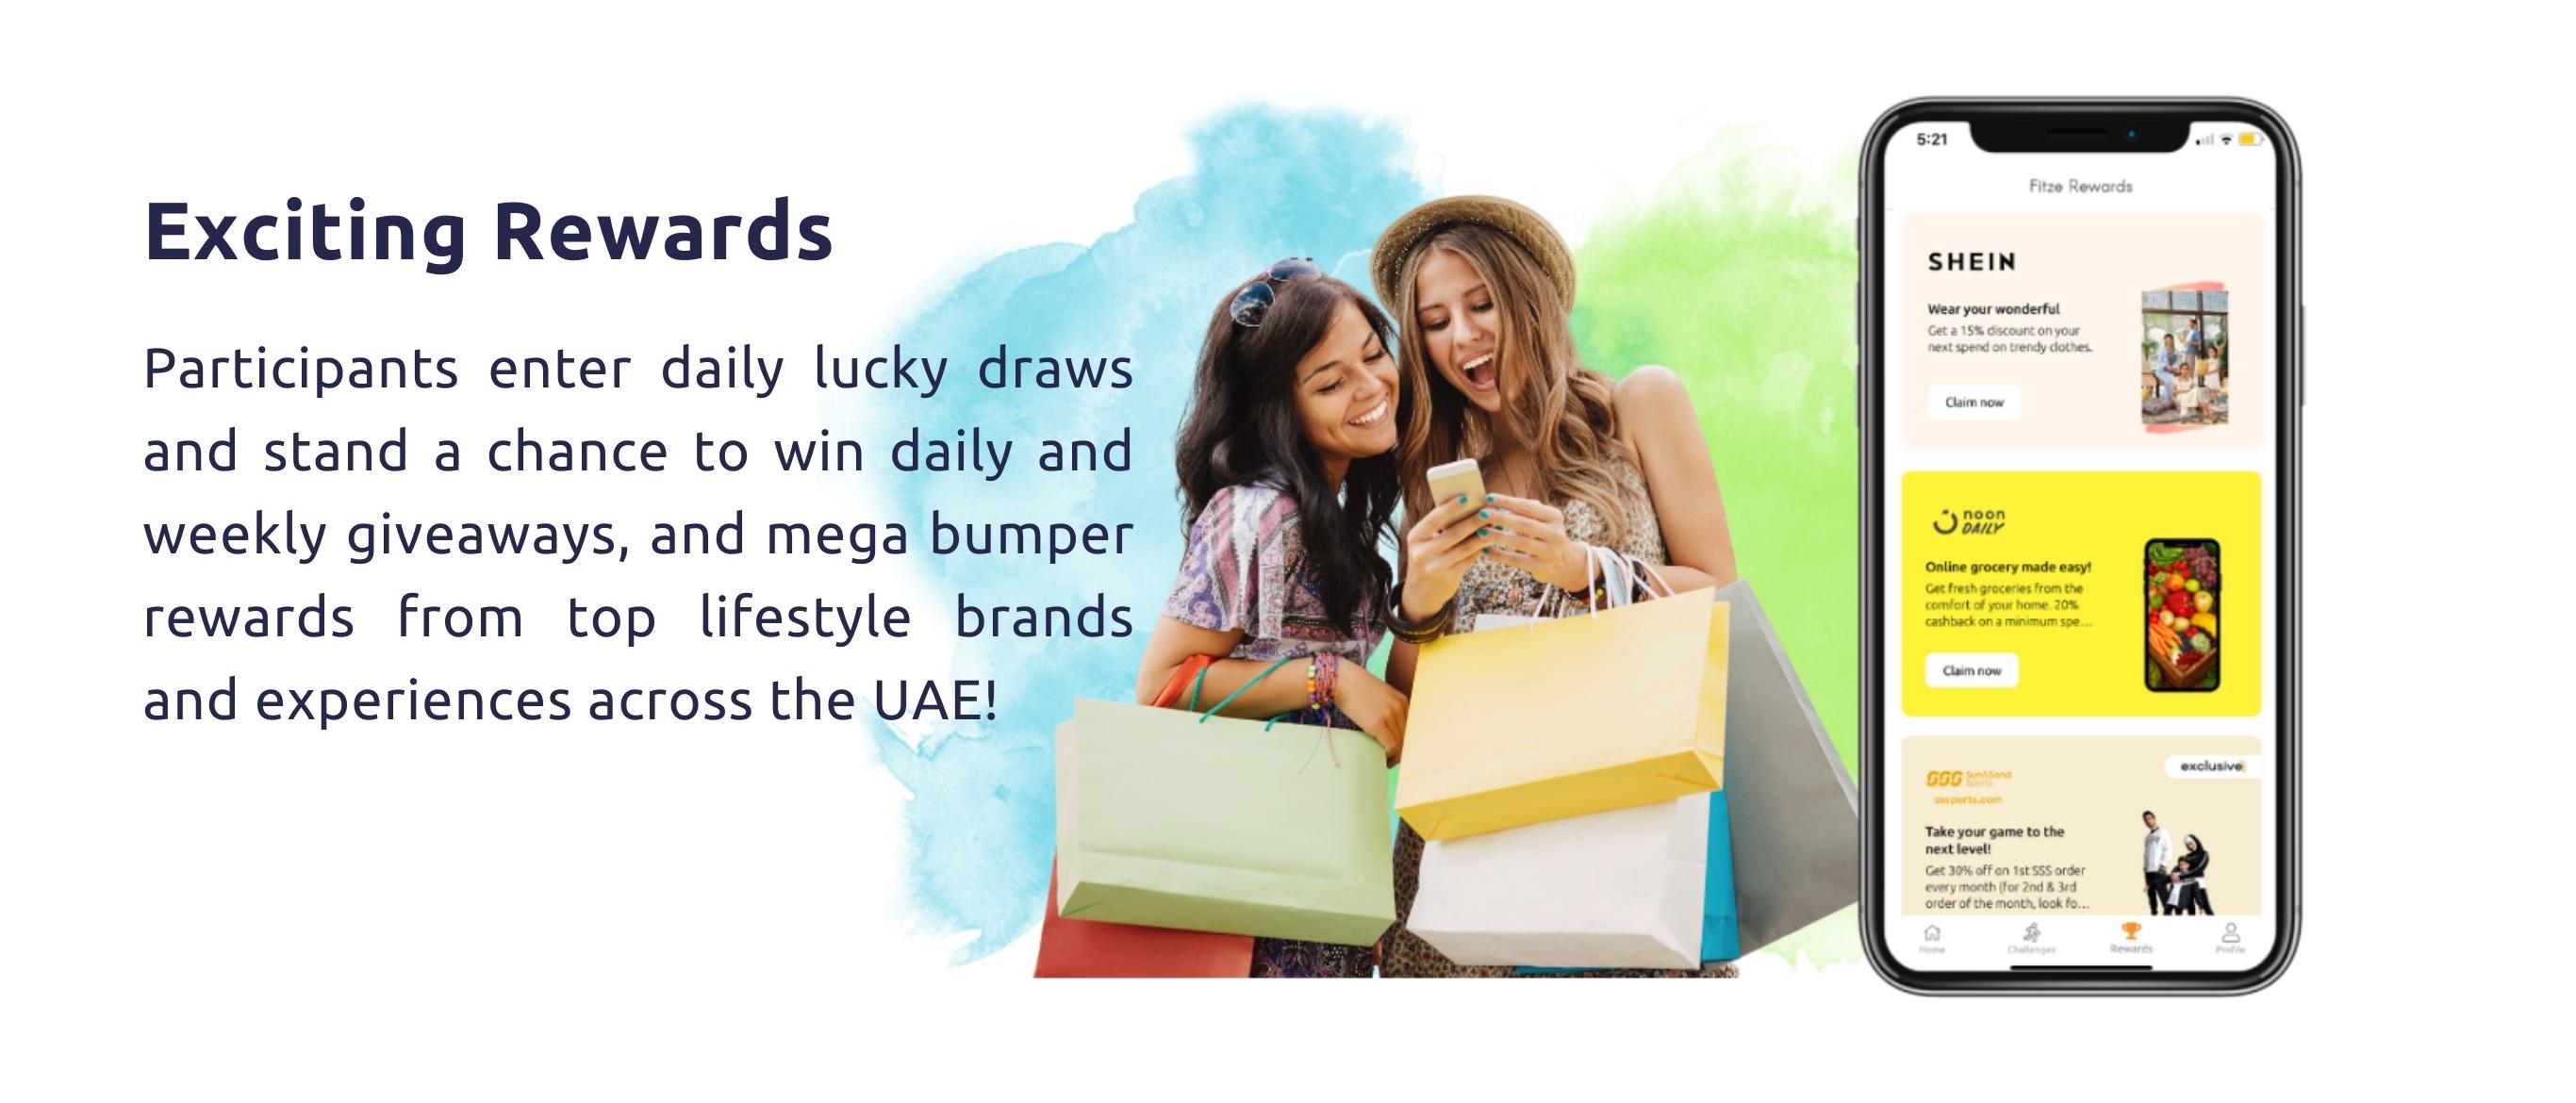 Exciting Rewards. Participants enter daily lucky draws and stand a chance to win daily and weekly giveaways, and mega bumper rewards from top lifestyle brands and experiences across the UAE!